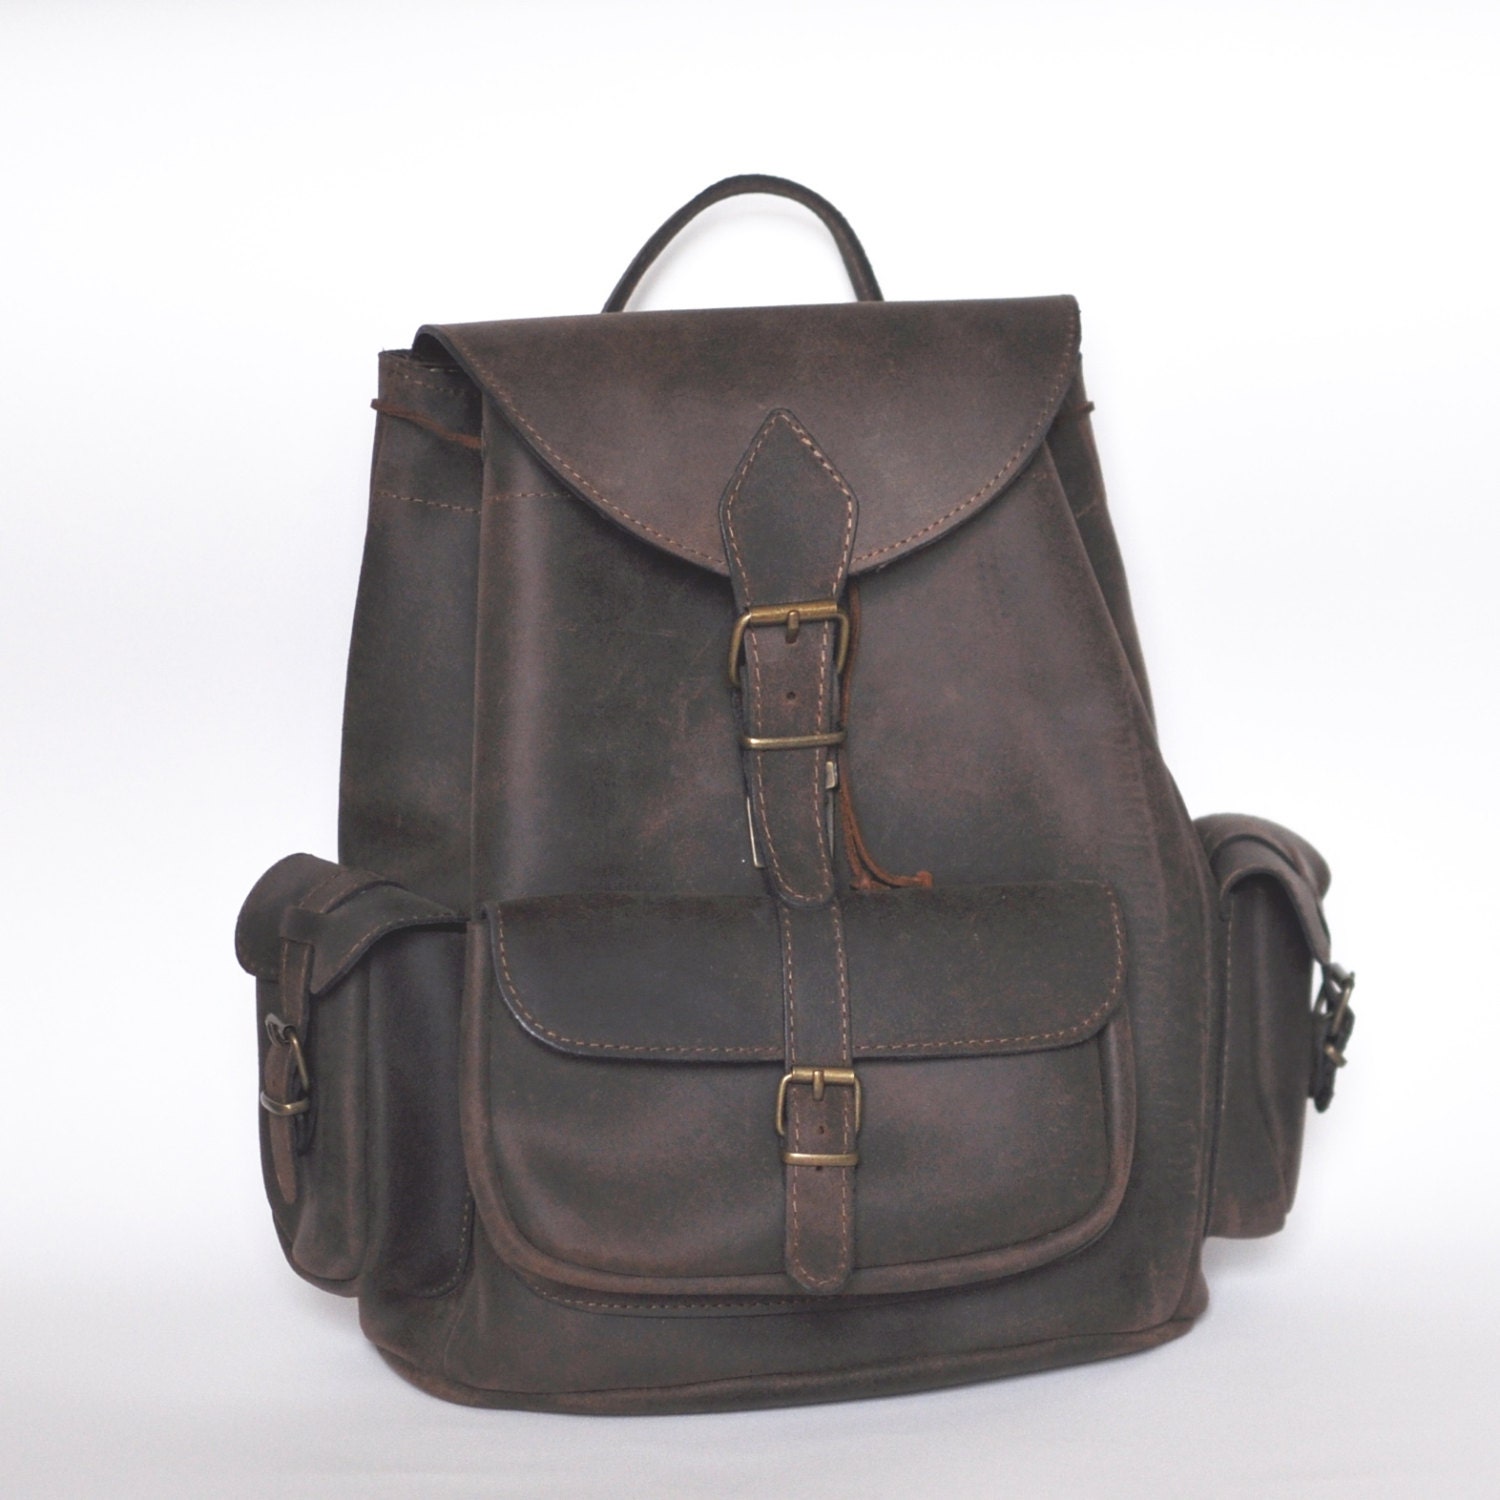 Large distressed leather backpack / Women/Men leather backpack